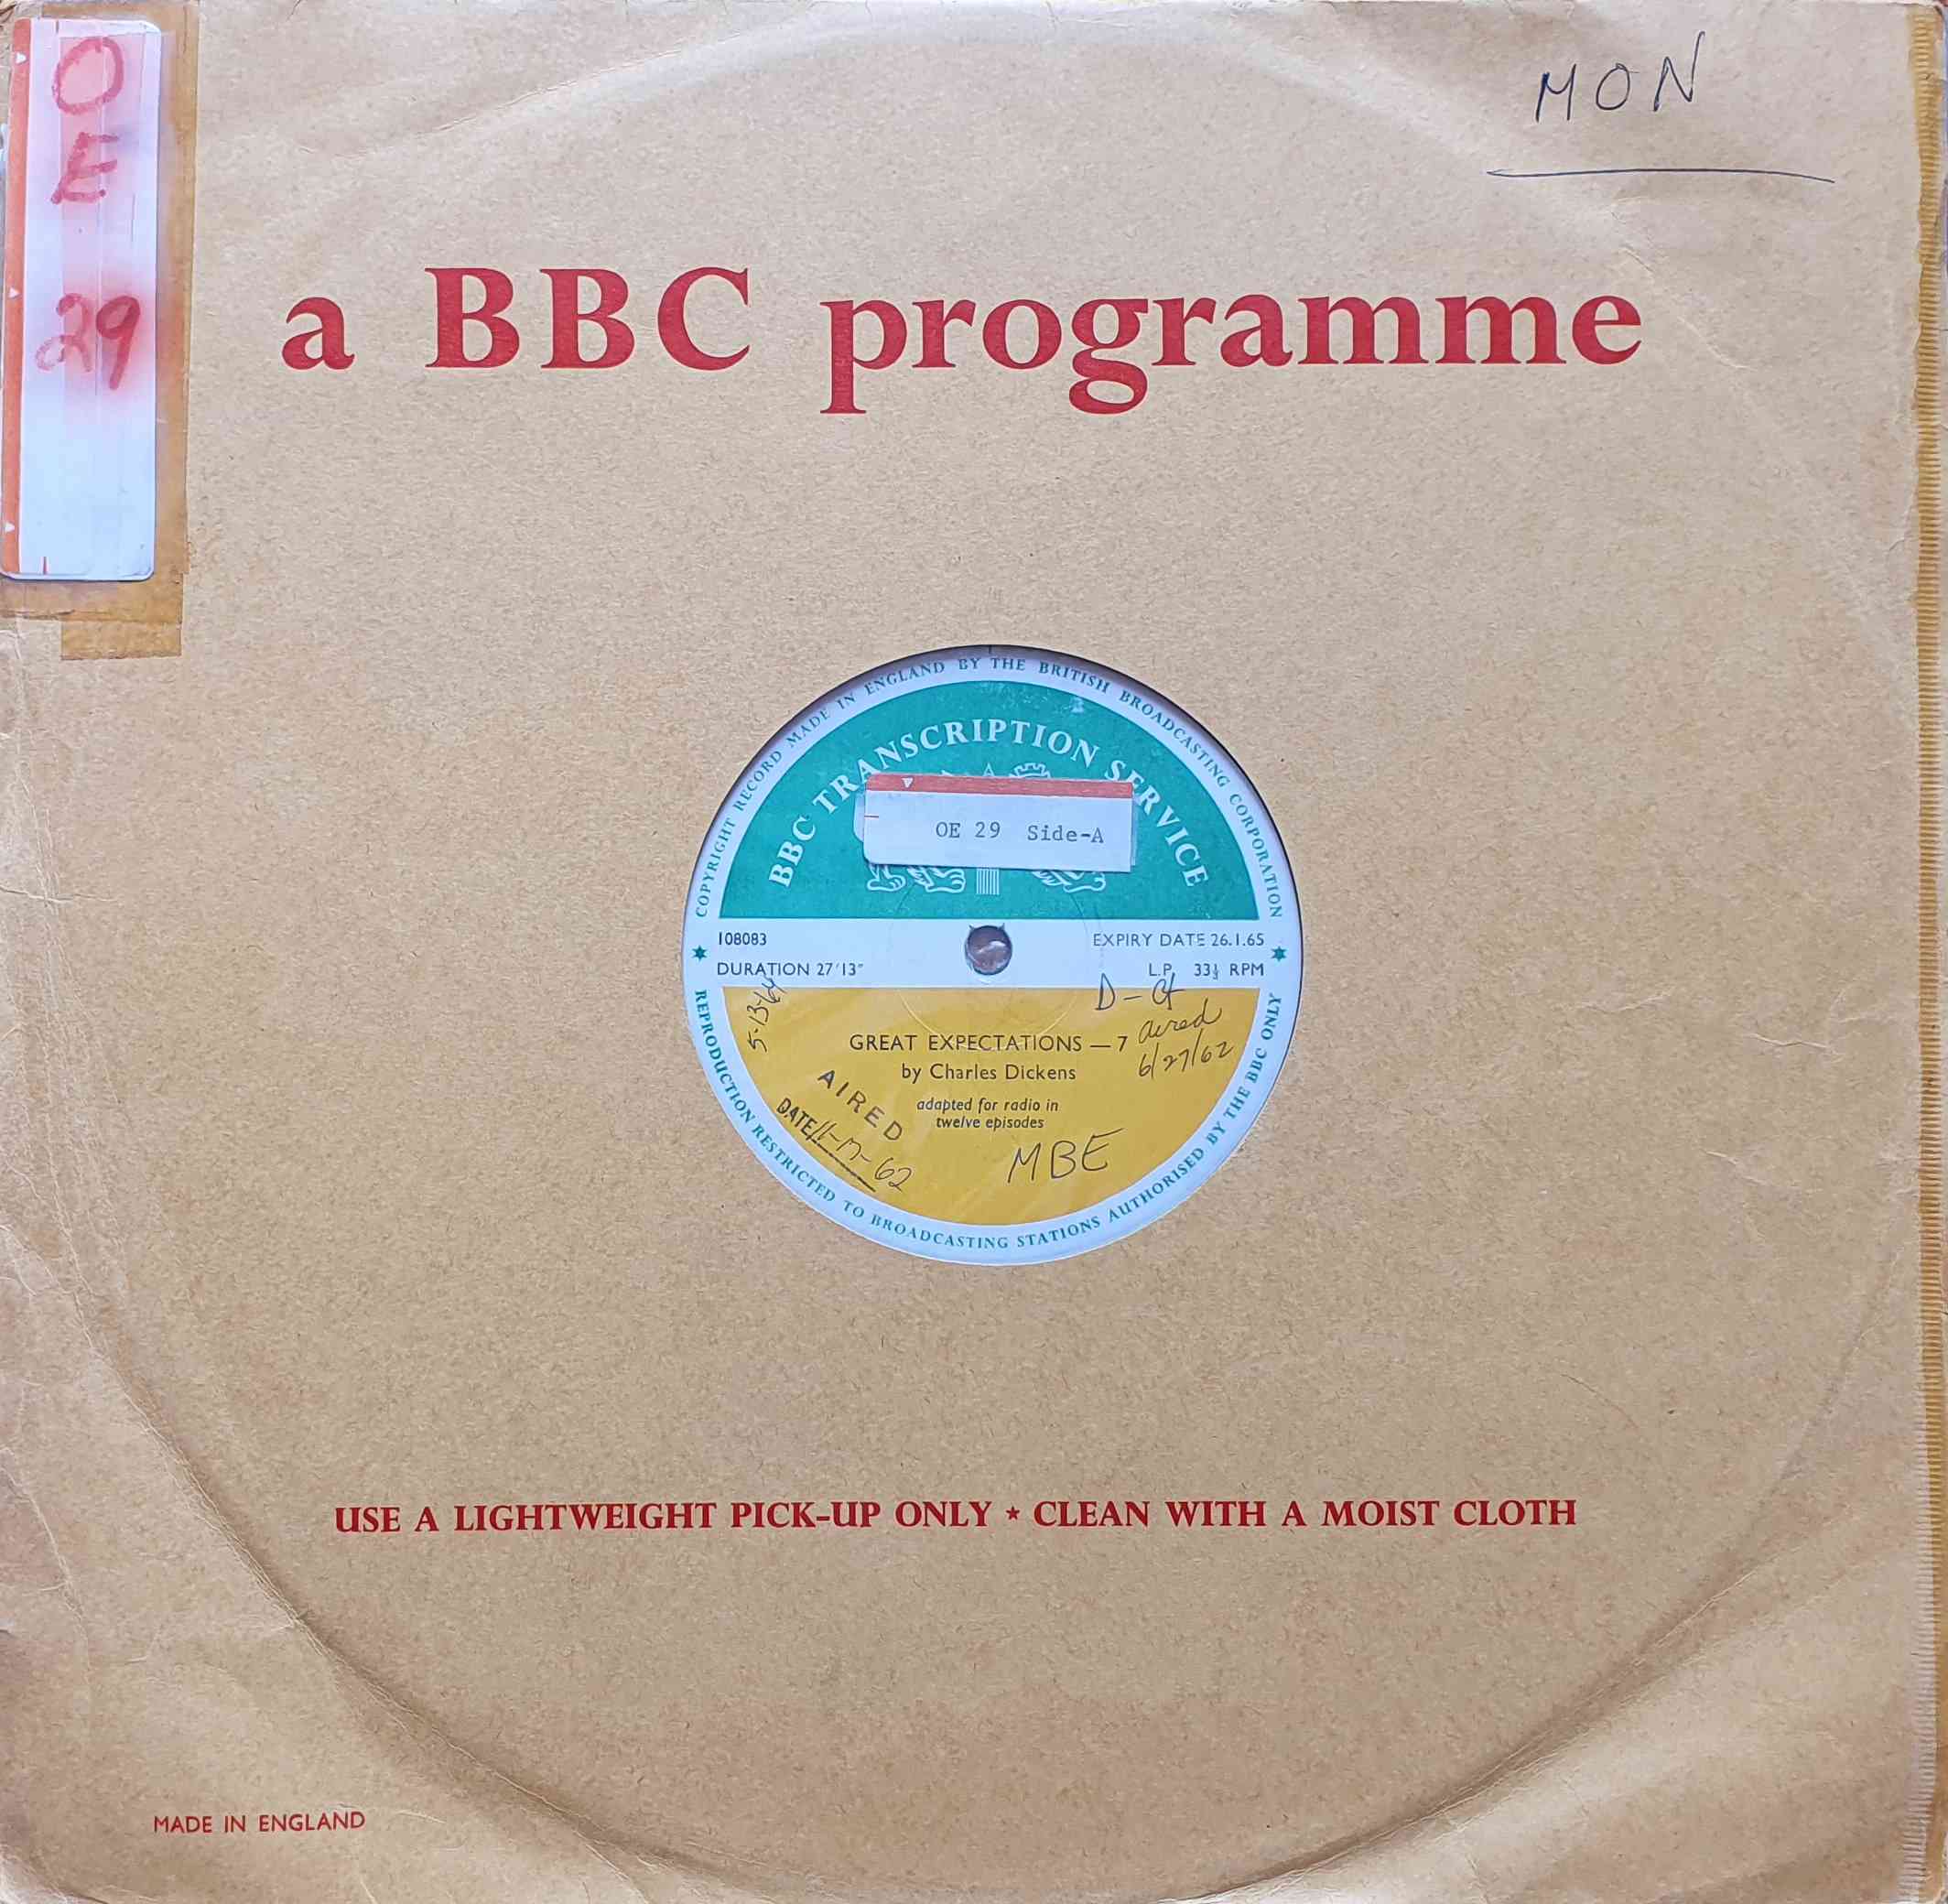 Picture of 108083 Great expectations - 7 & 8 by artist Charles Dickens from the BBC albums - Records and Tapes library